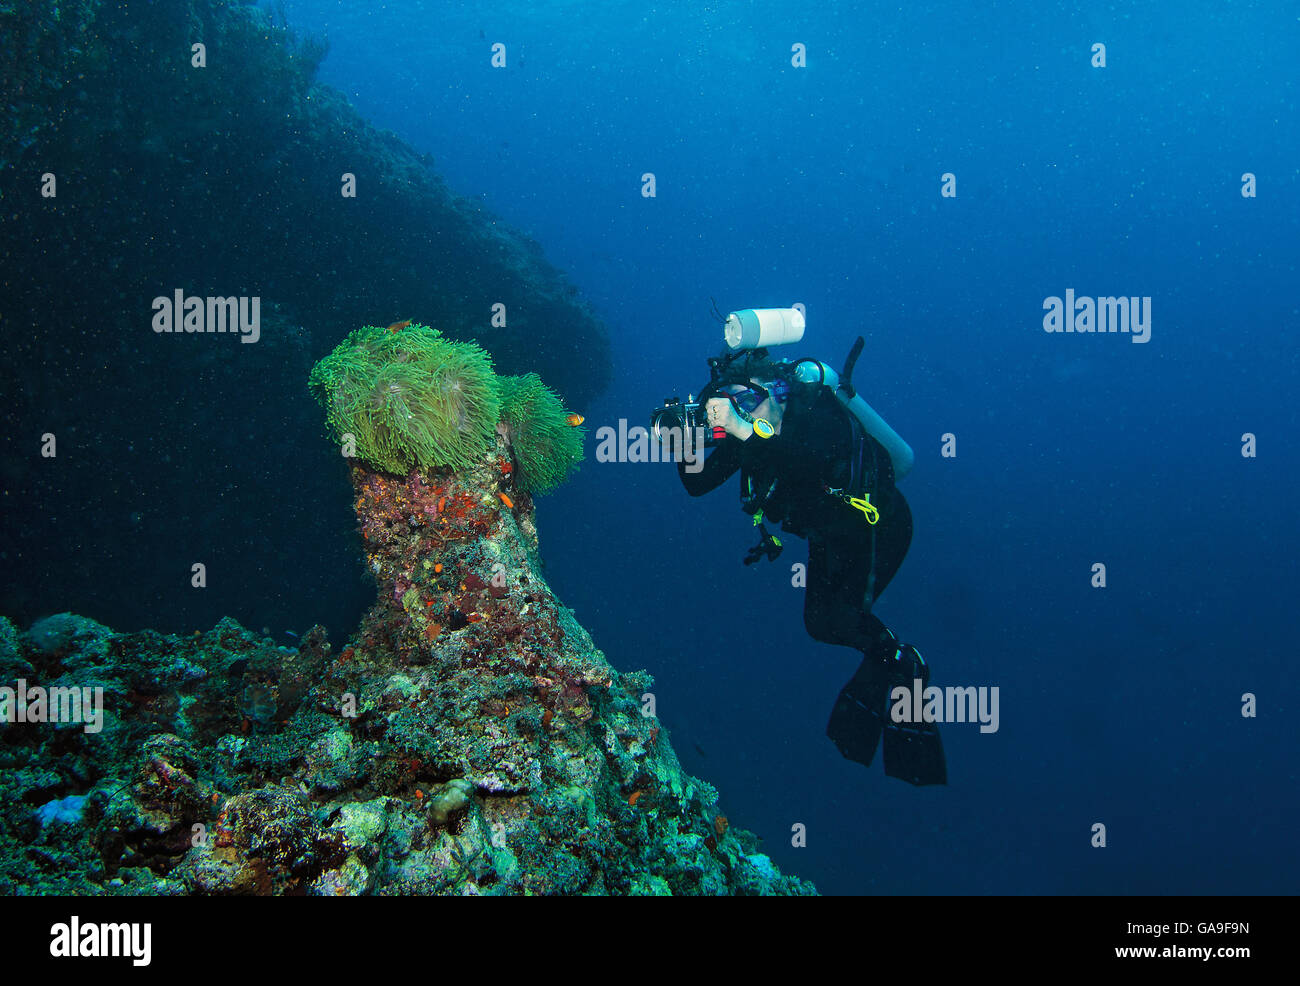 Female Scuba diver taking photograph on coral reef in Maldives, Indian Ocean Stock Photo